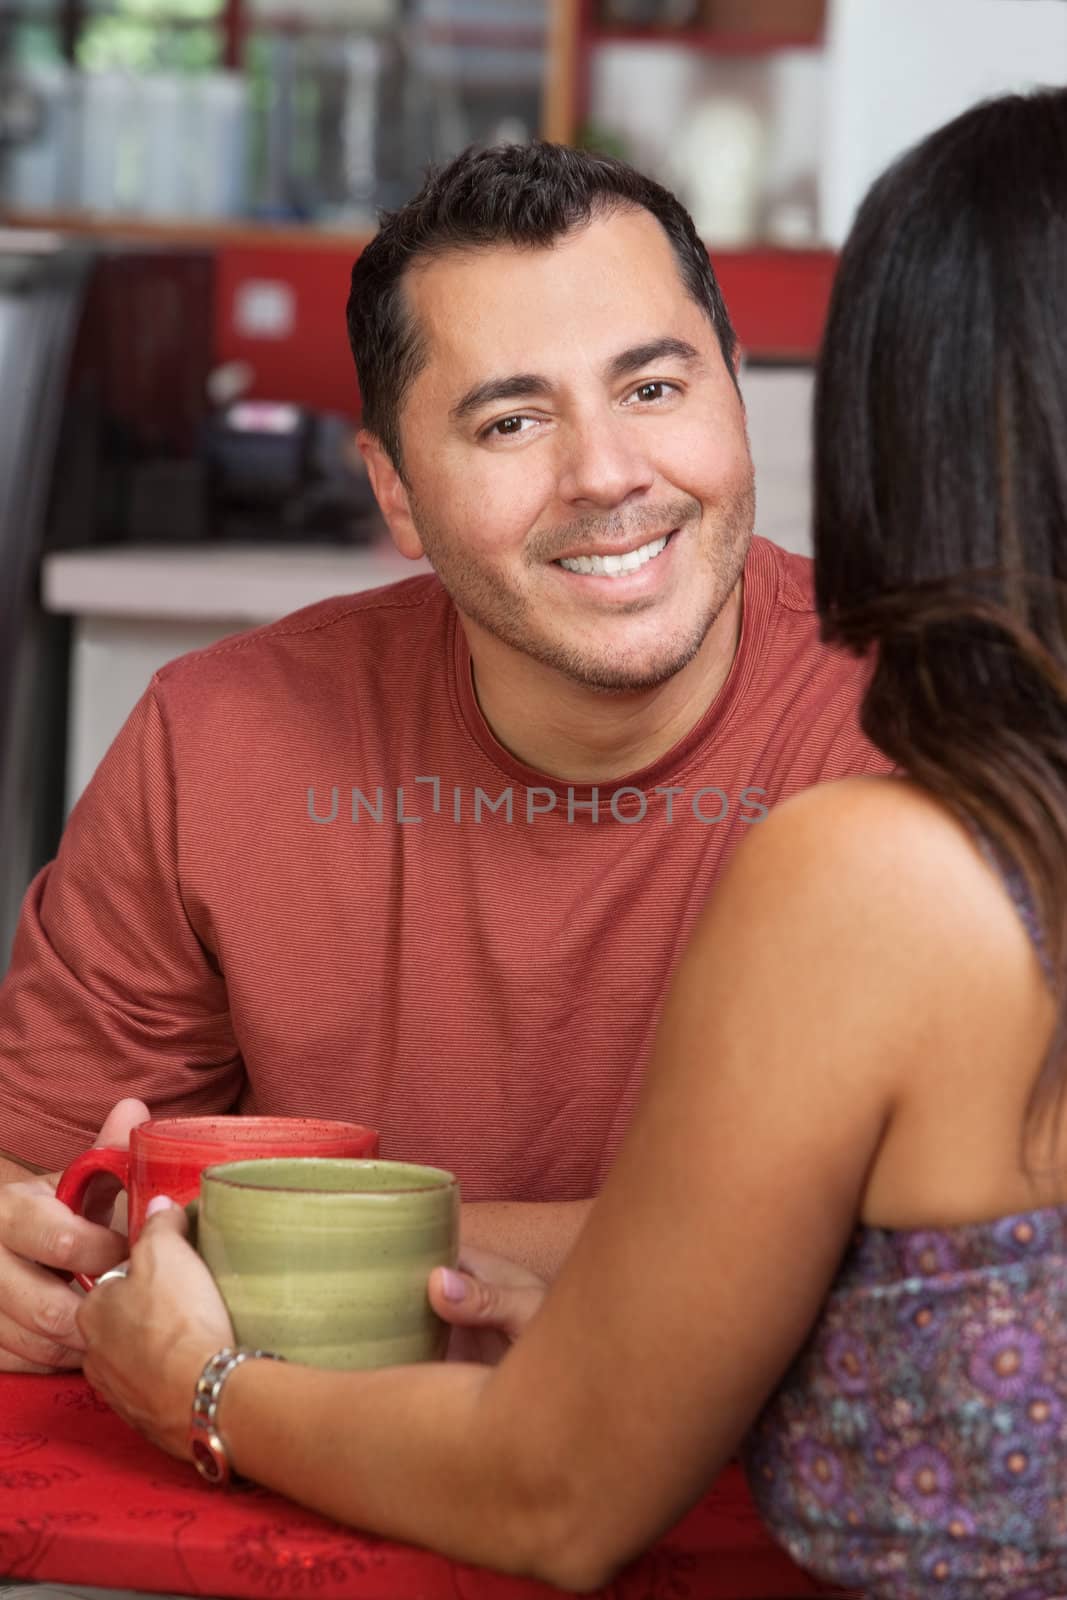 Smiling handsome hispanic man with woman in coffeehouse